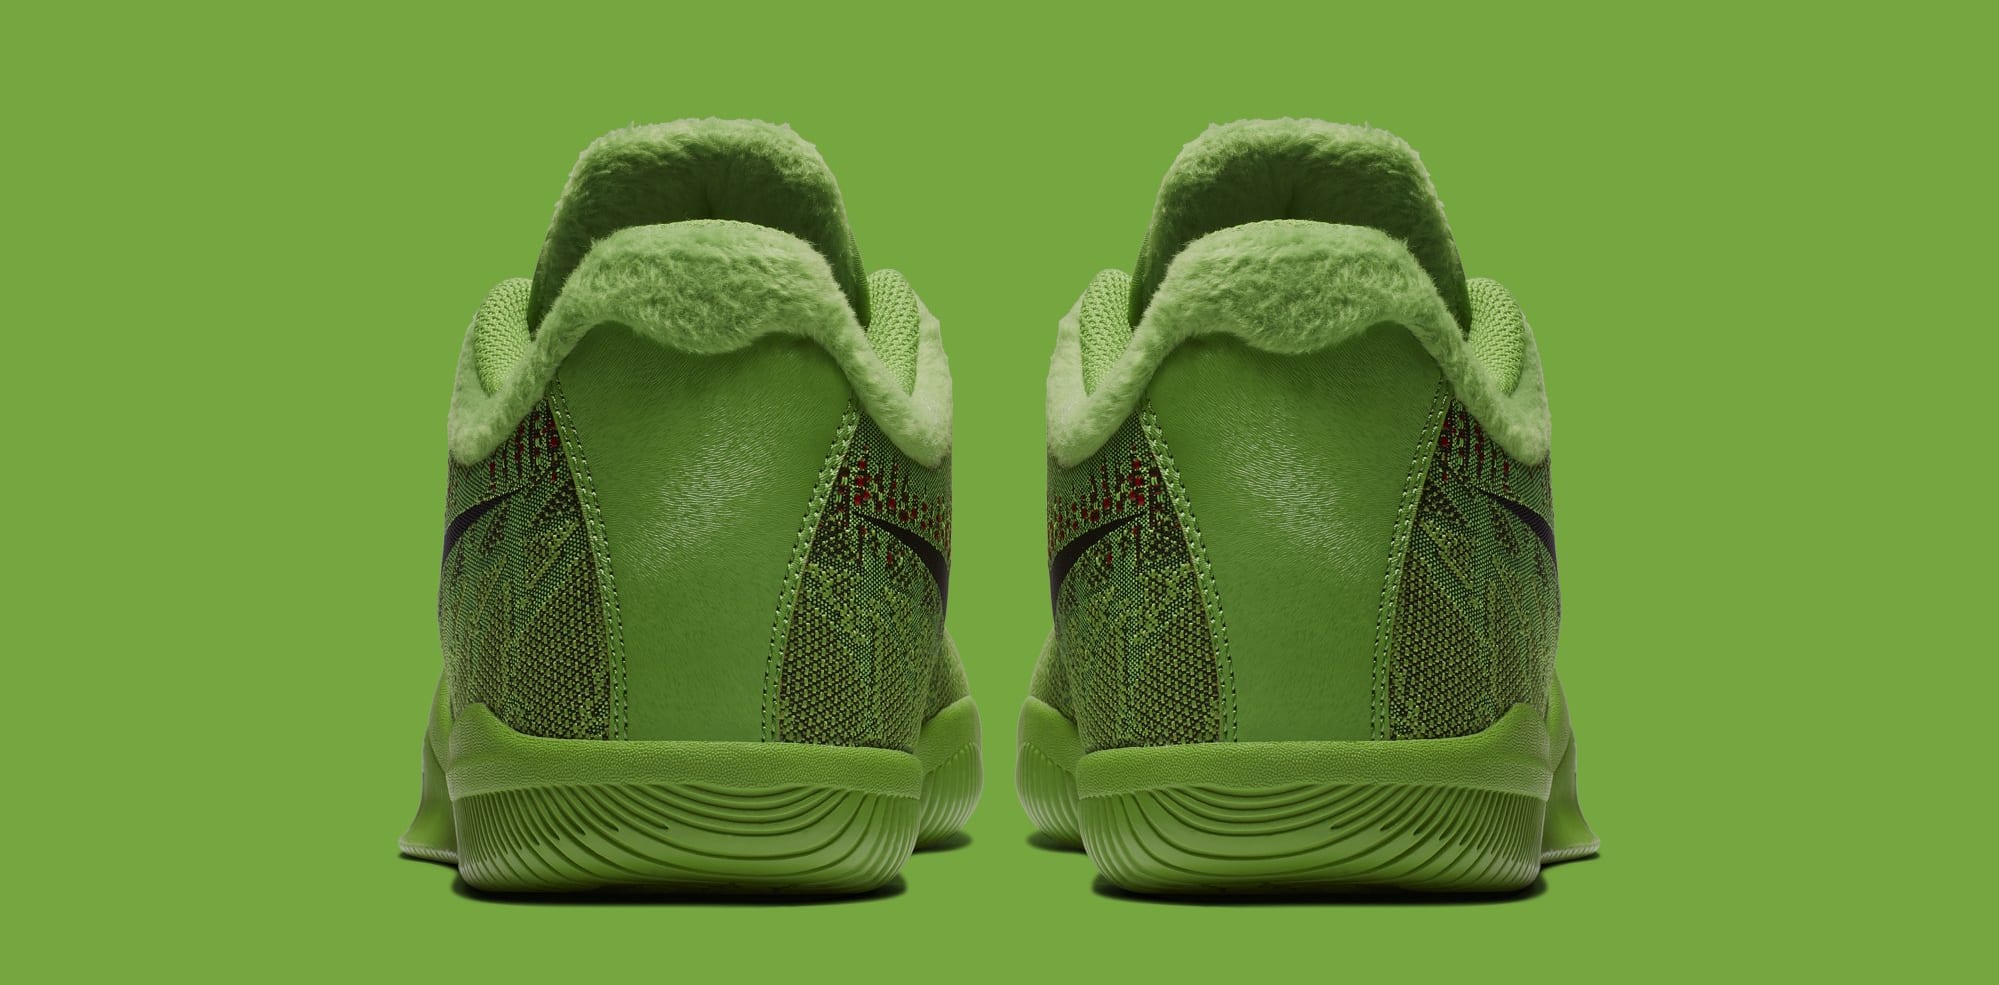 Nike Mamba Rage Gets Collared by The Grinch - Sneaker Freaker